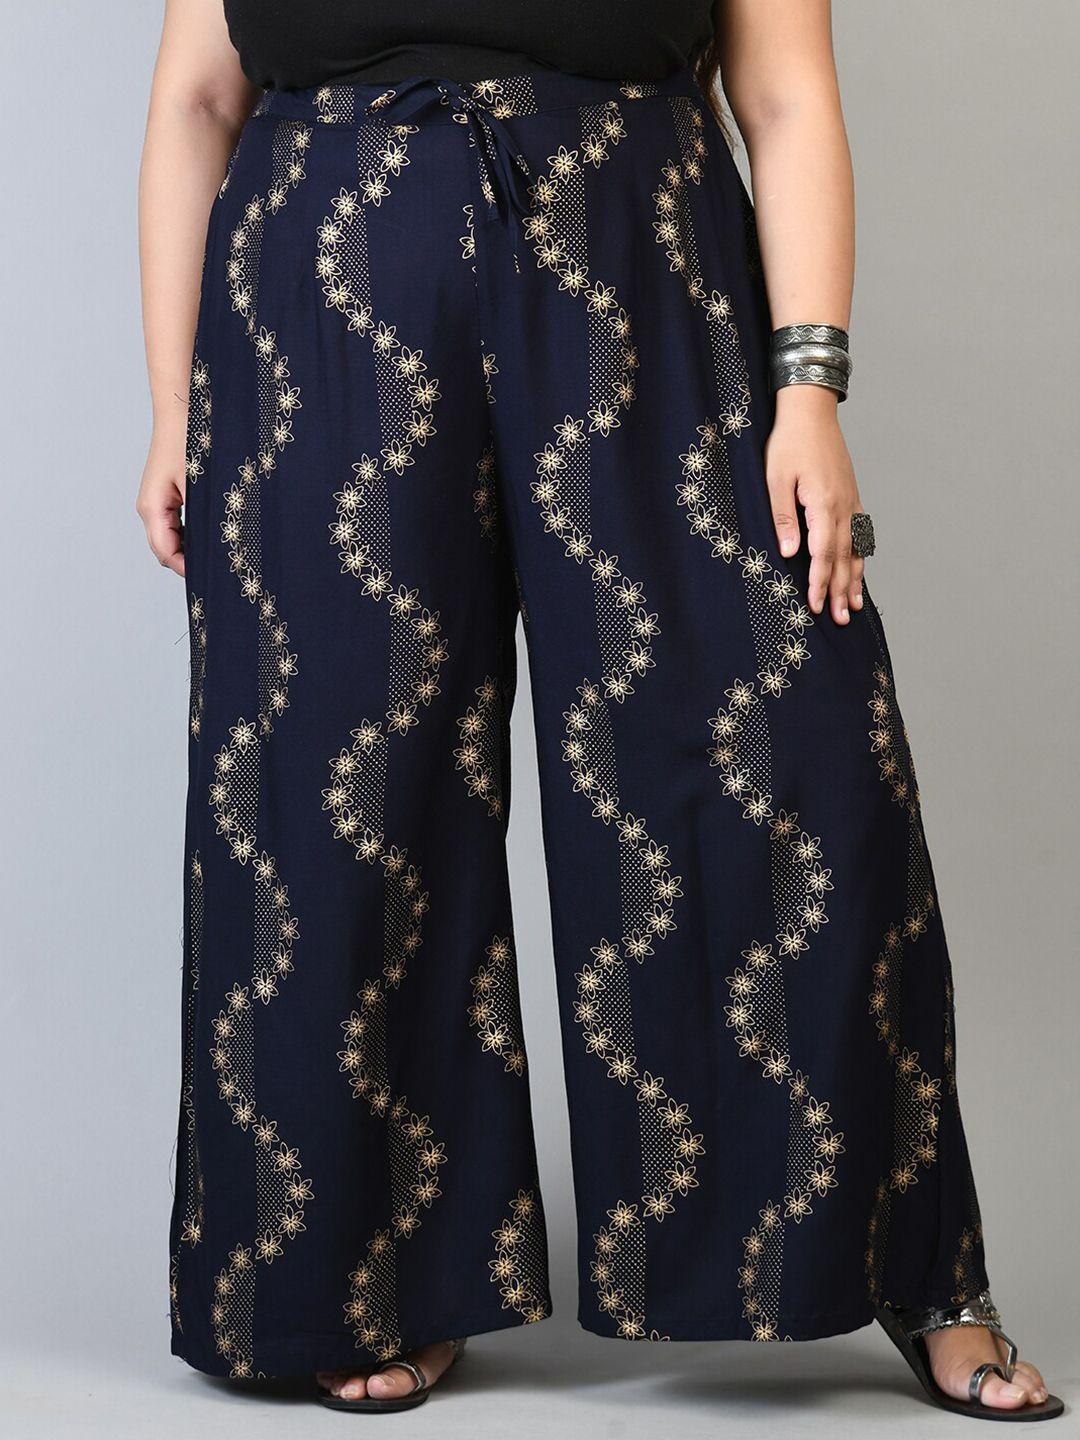 prettyplus by desinoor.com women plus size navy blue & gold-toned floral printed palazzos